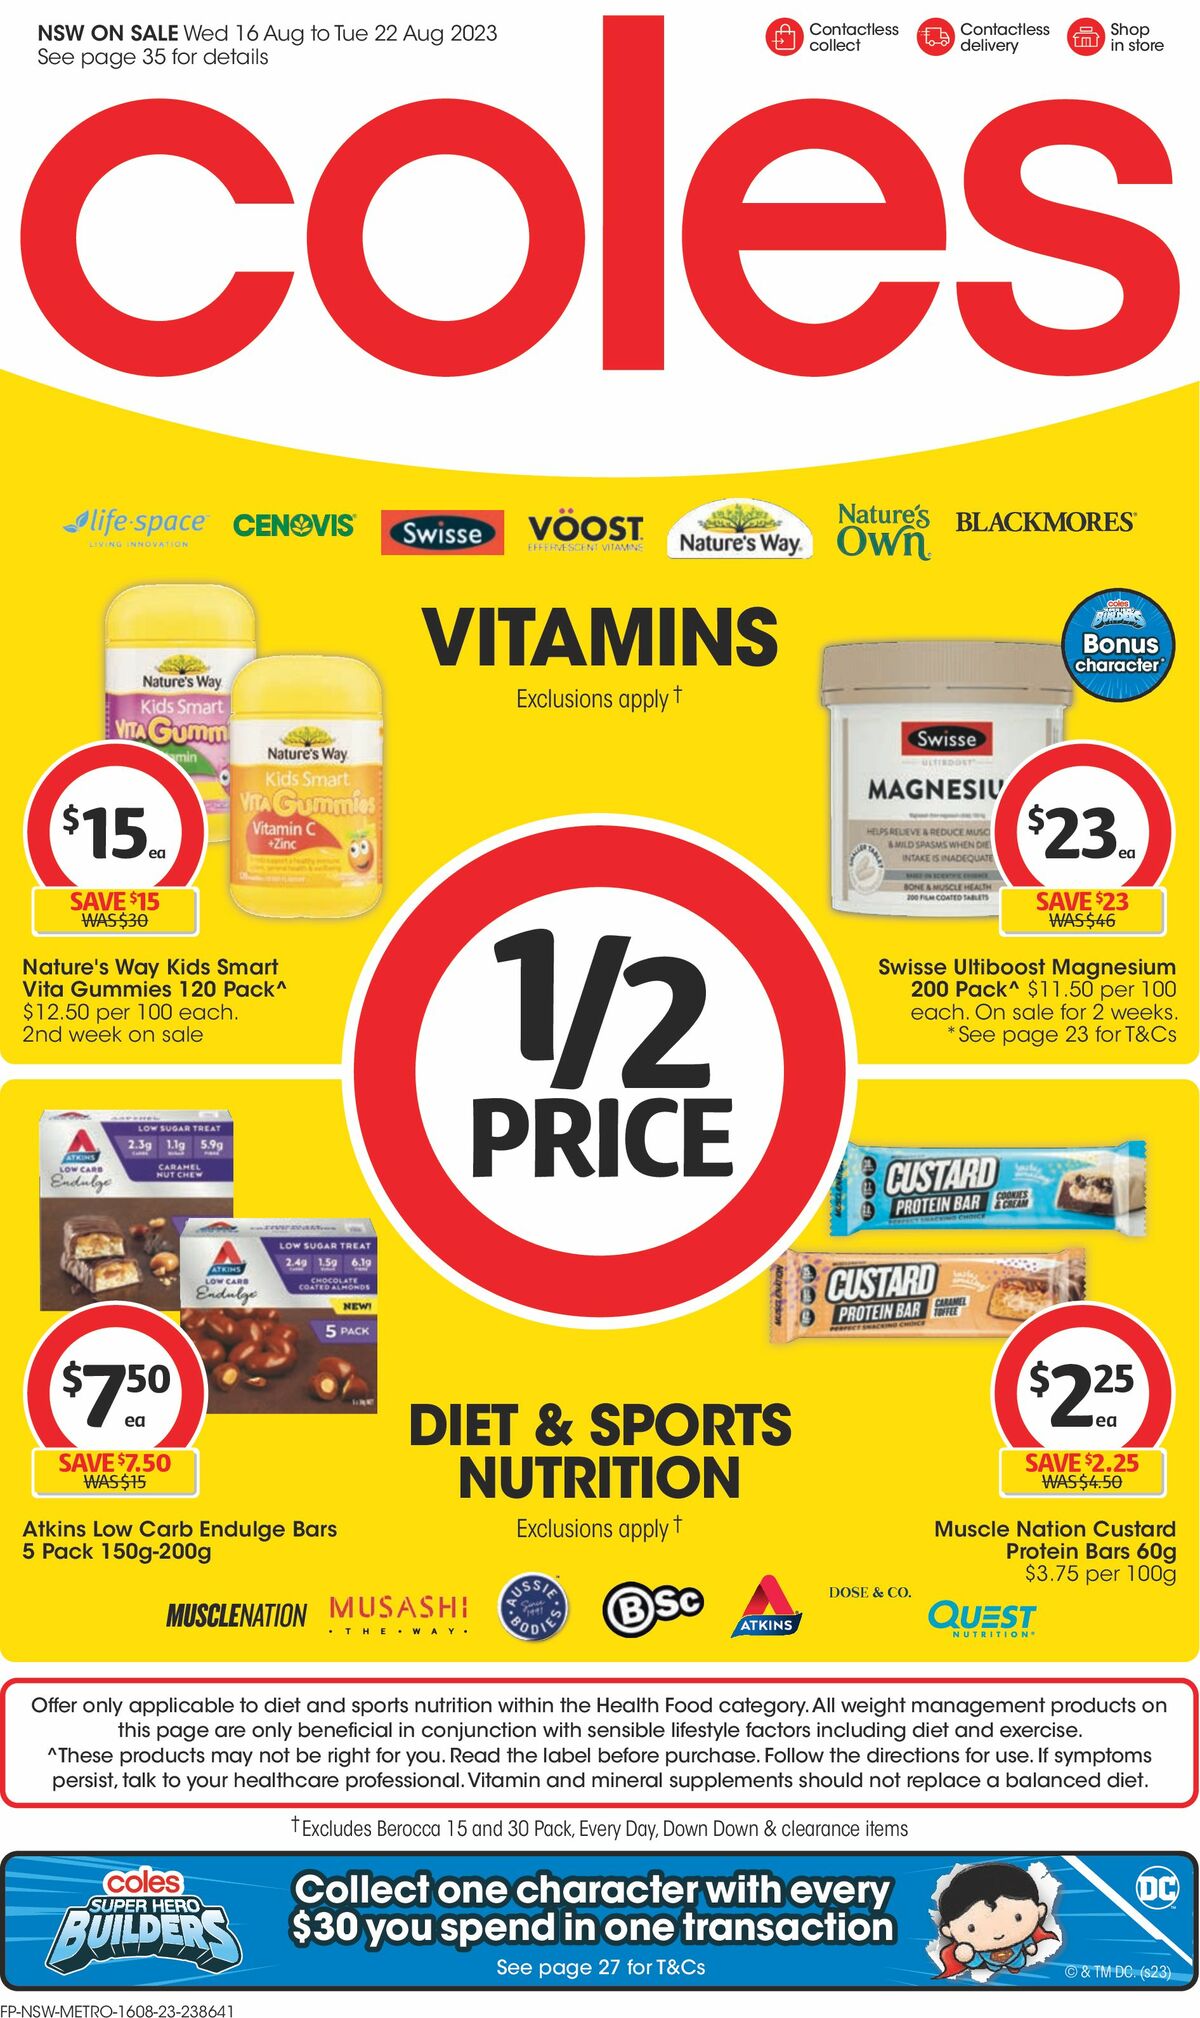 Coles Catalogues from 16 August